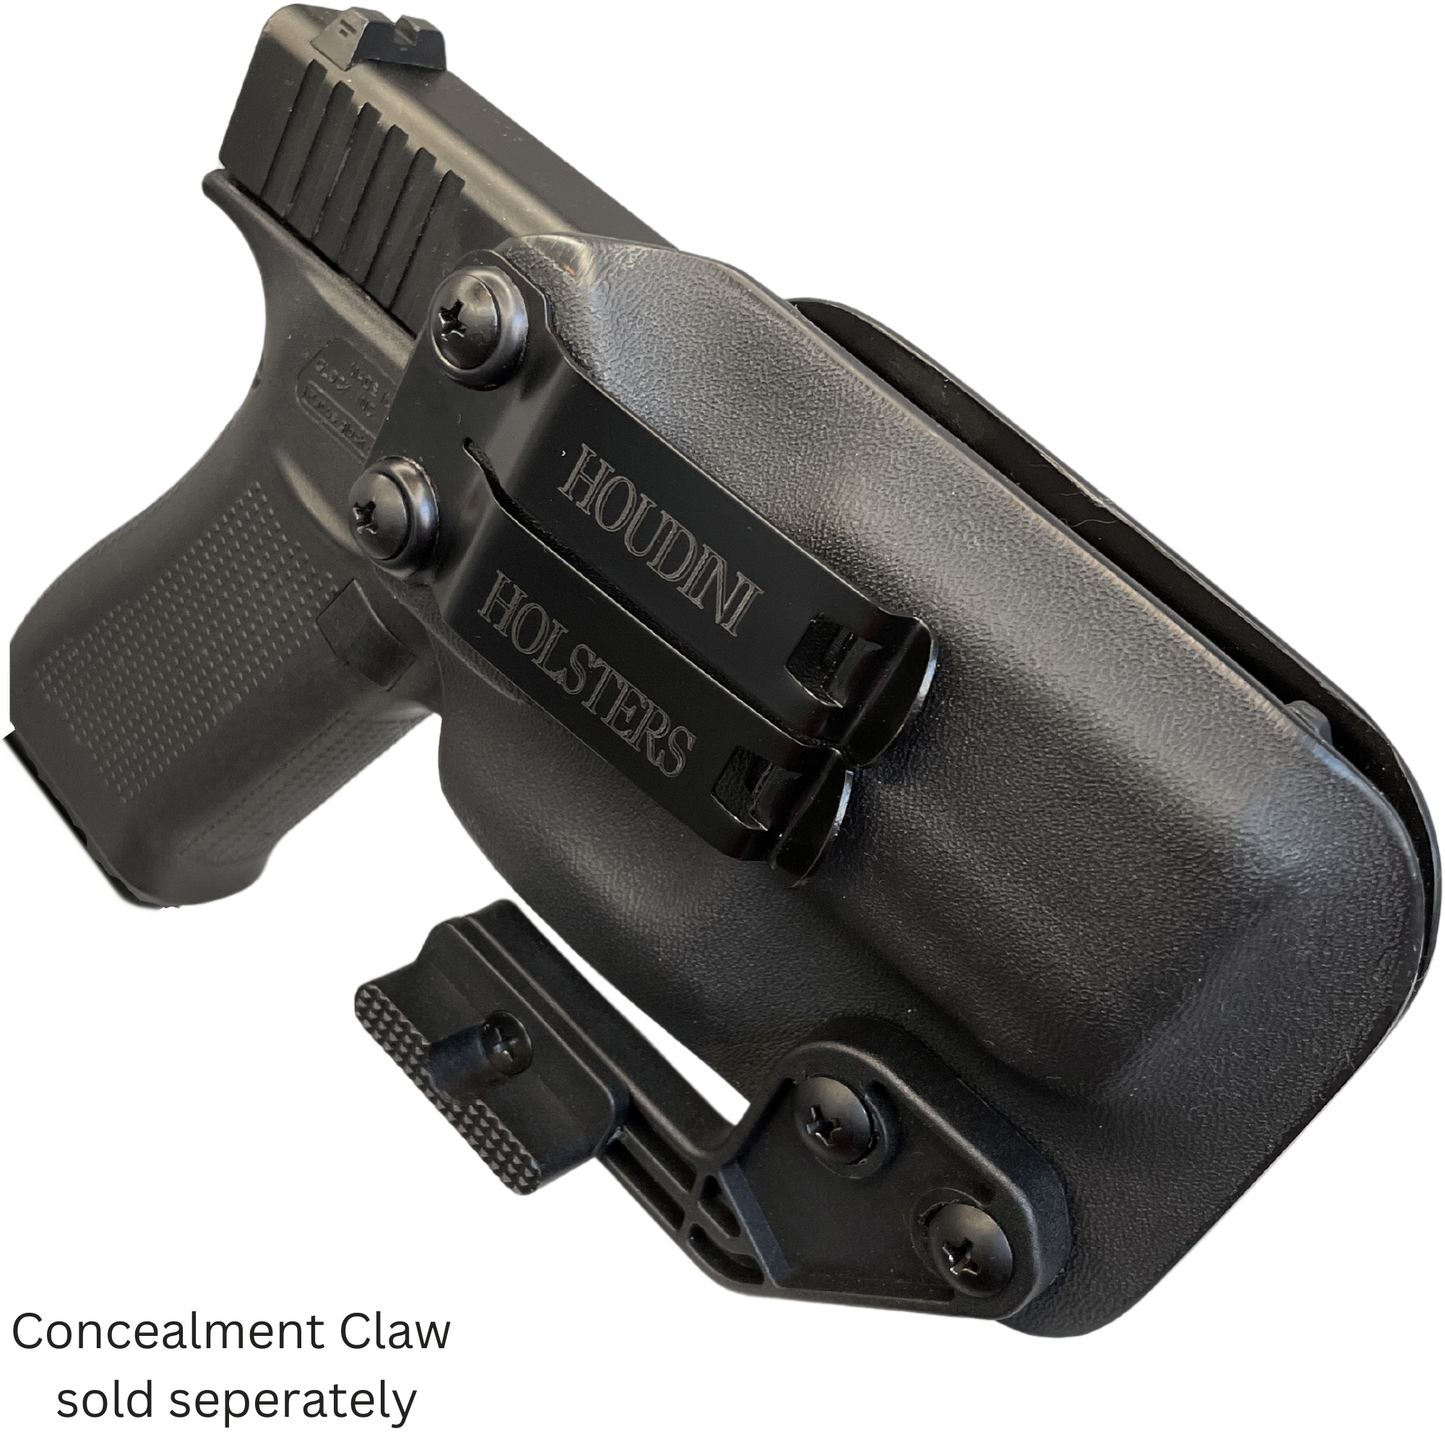 Breakout 2.0 IWB Holster | Rapid Access, Complete Concealment, and All-Day Comfort.